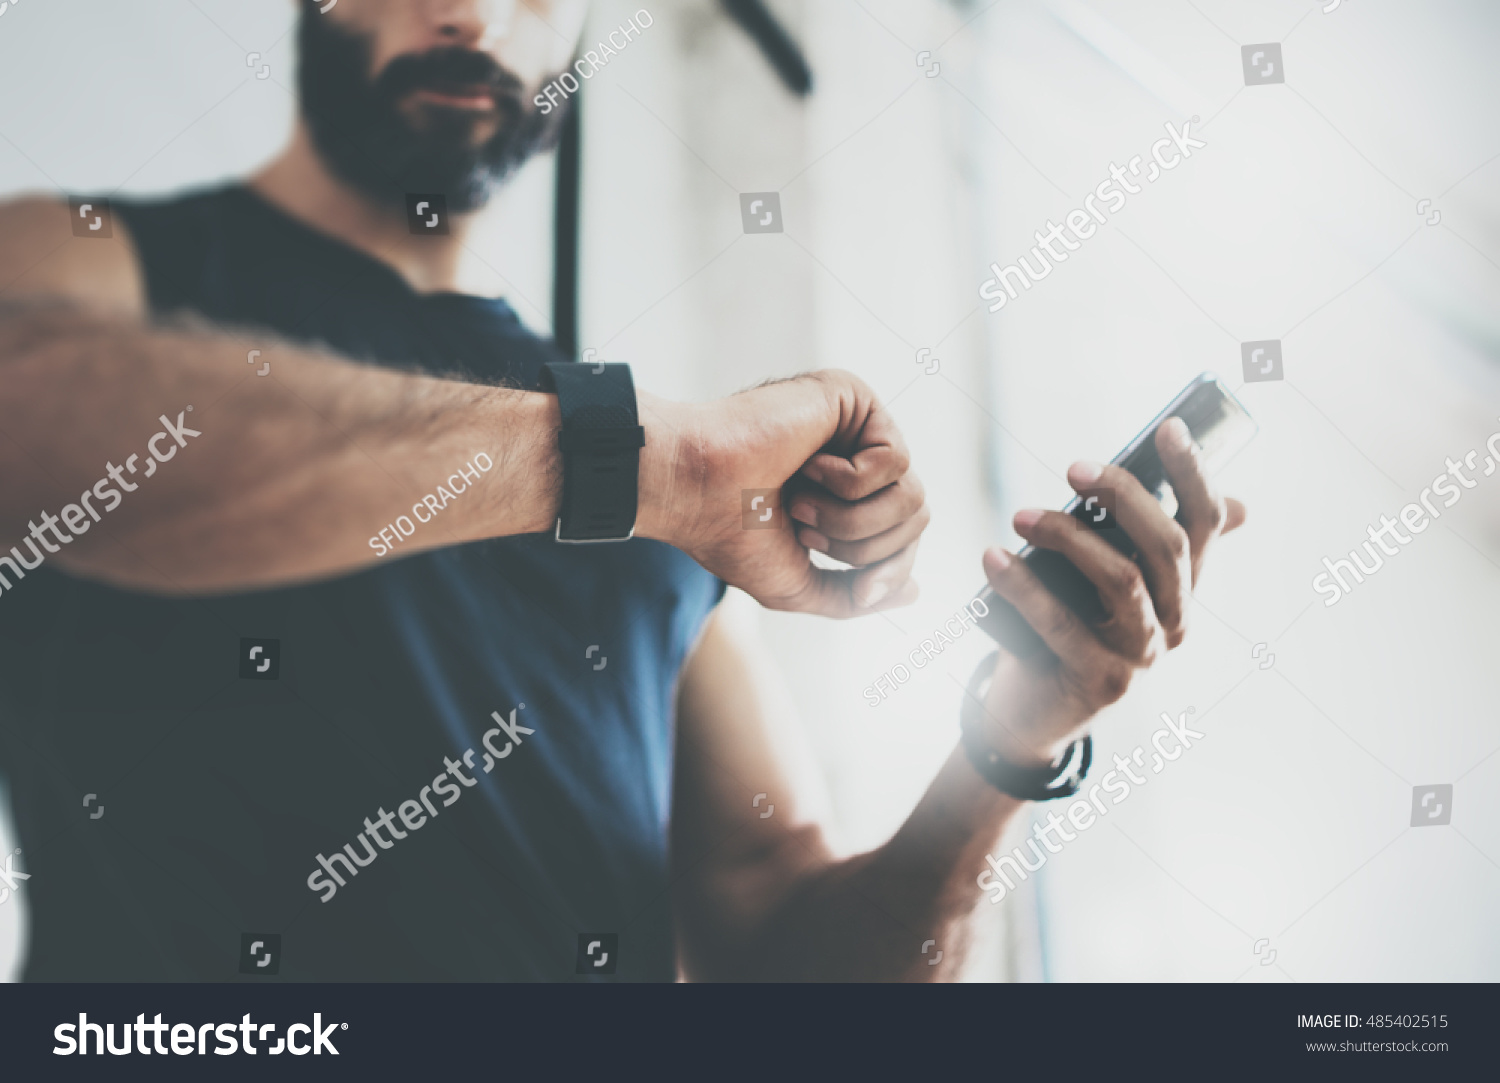 Close-up Shot Bearded Sportive Man After Workout Session Checks Fitness Results Smartphone.Adult Guy Wearing Sport Tracker Wristband Arm.Training hard inside gym.Horizontal bar background.Blurred #485402515